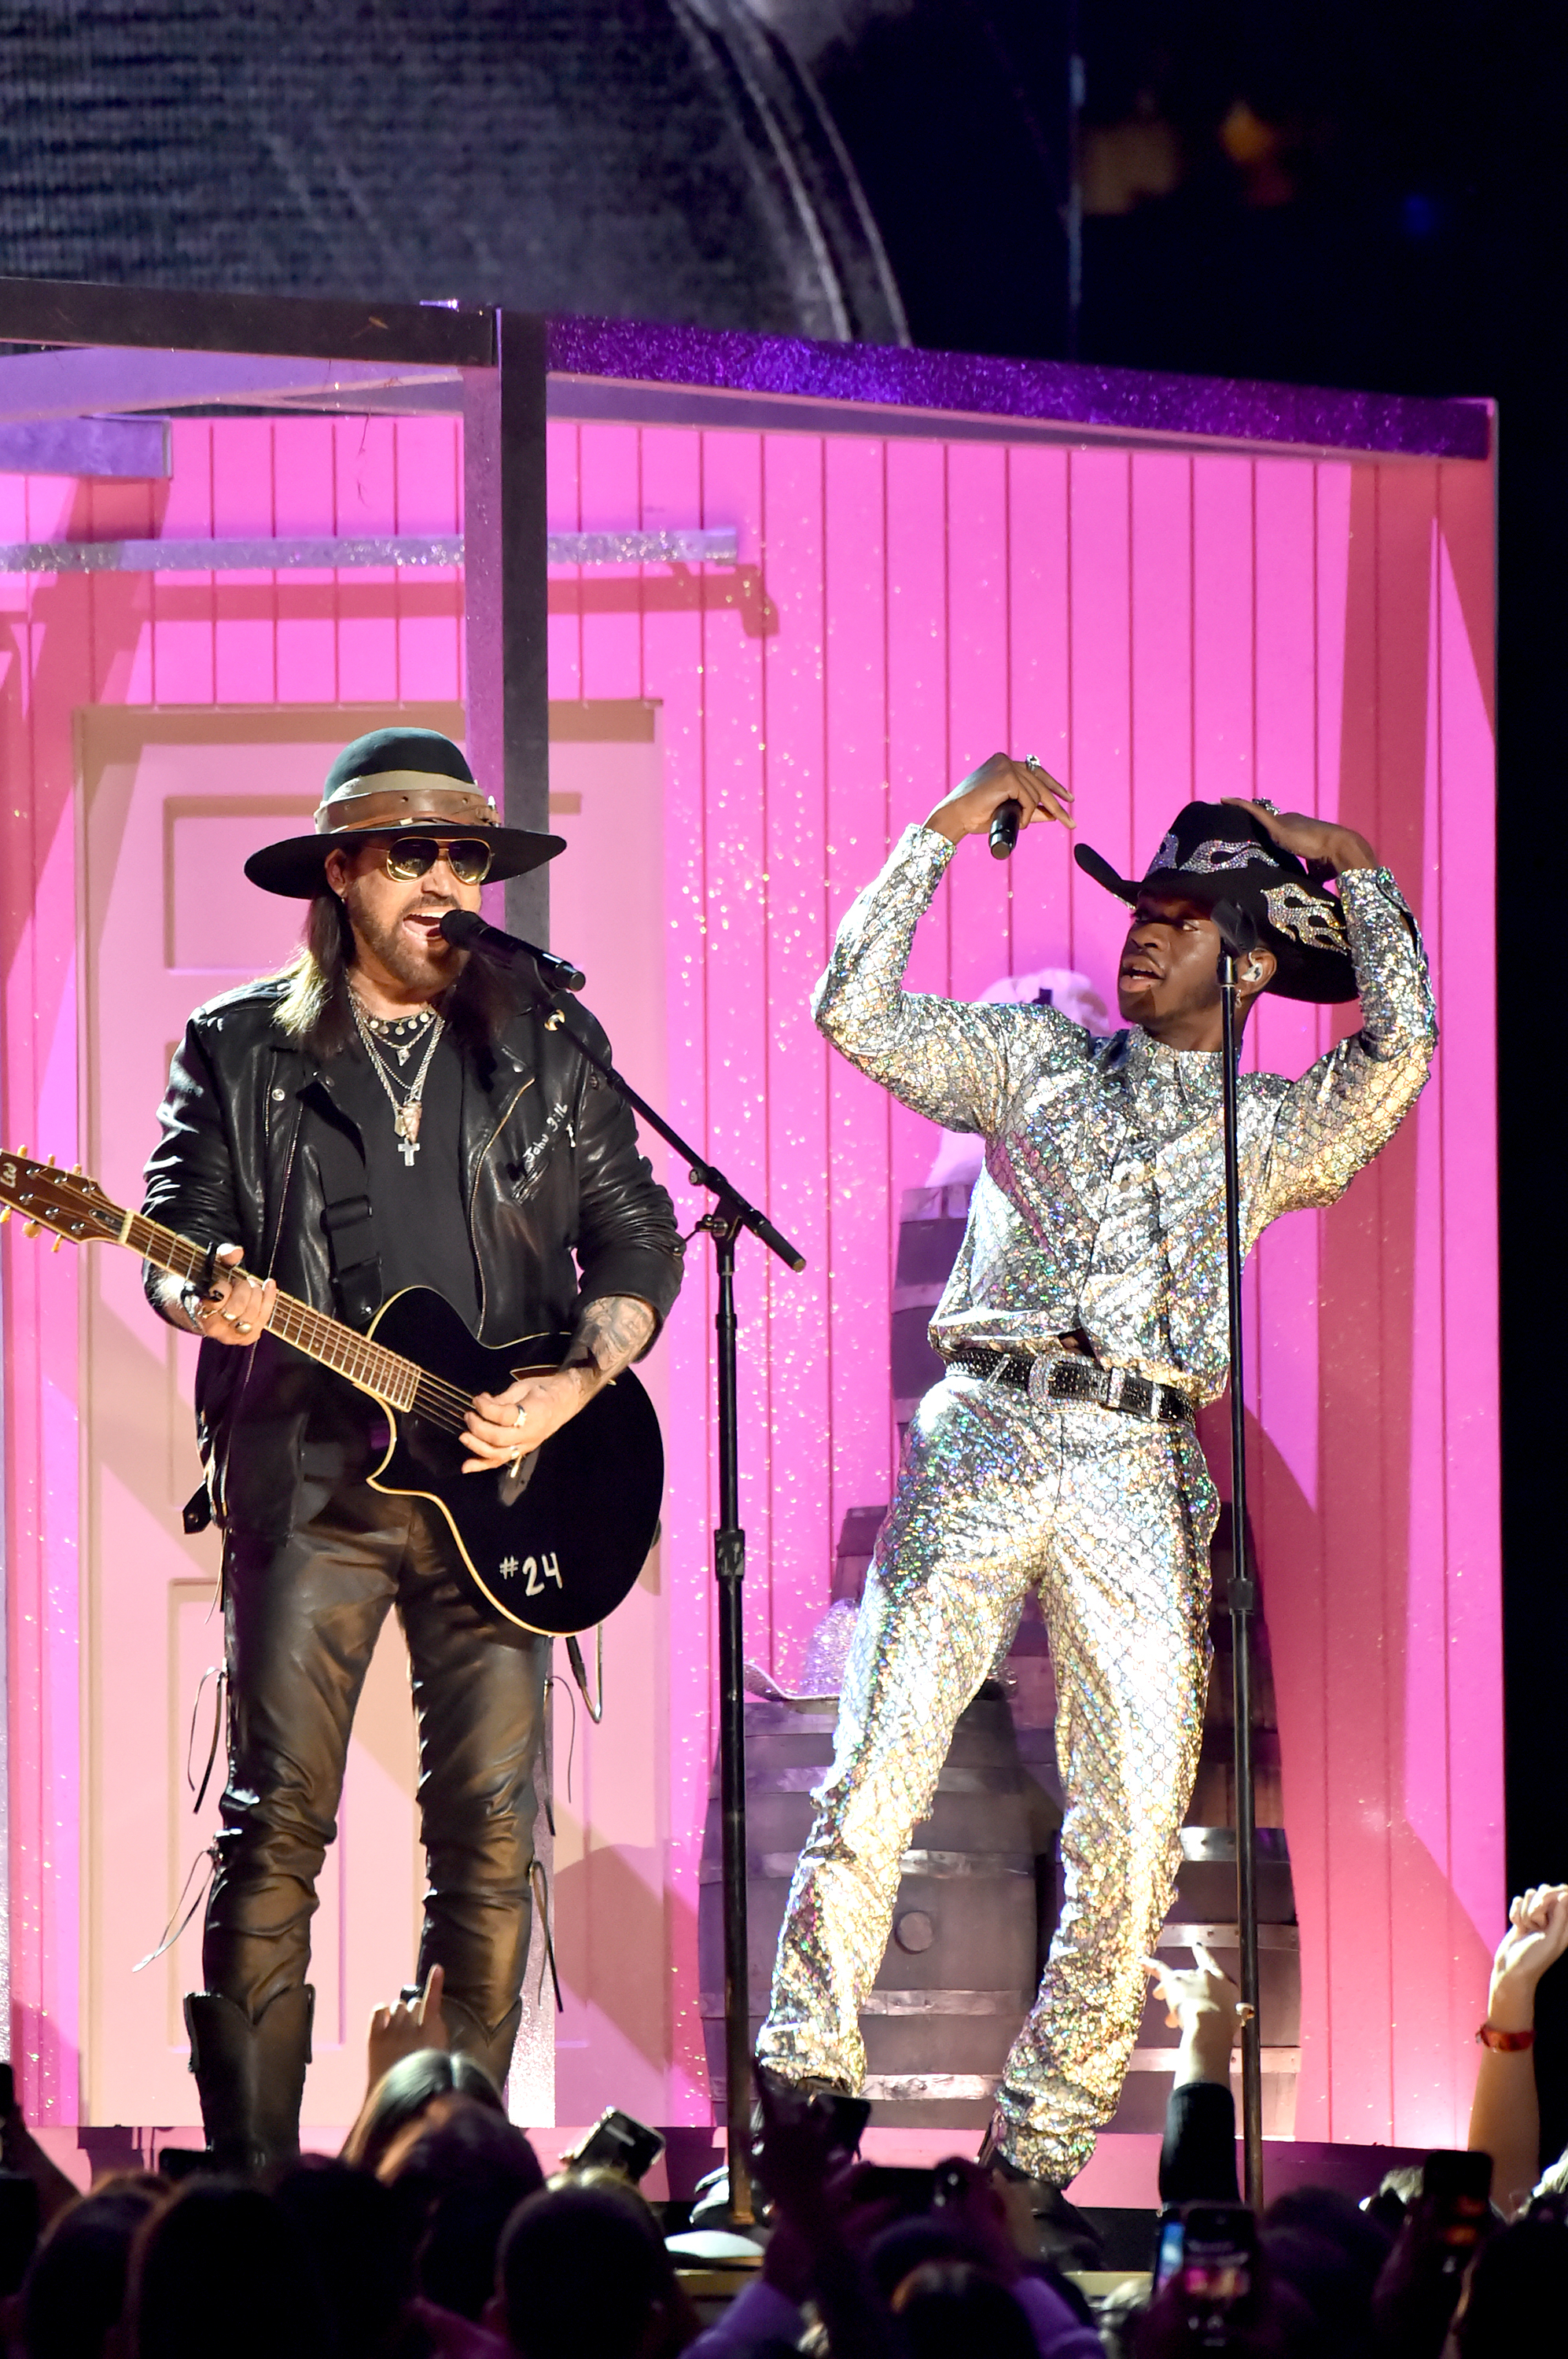 Close-up of Lil Nas performing in a Western-style hat and outfit